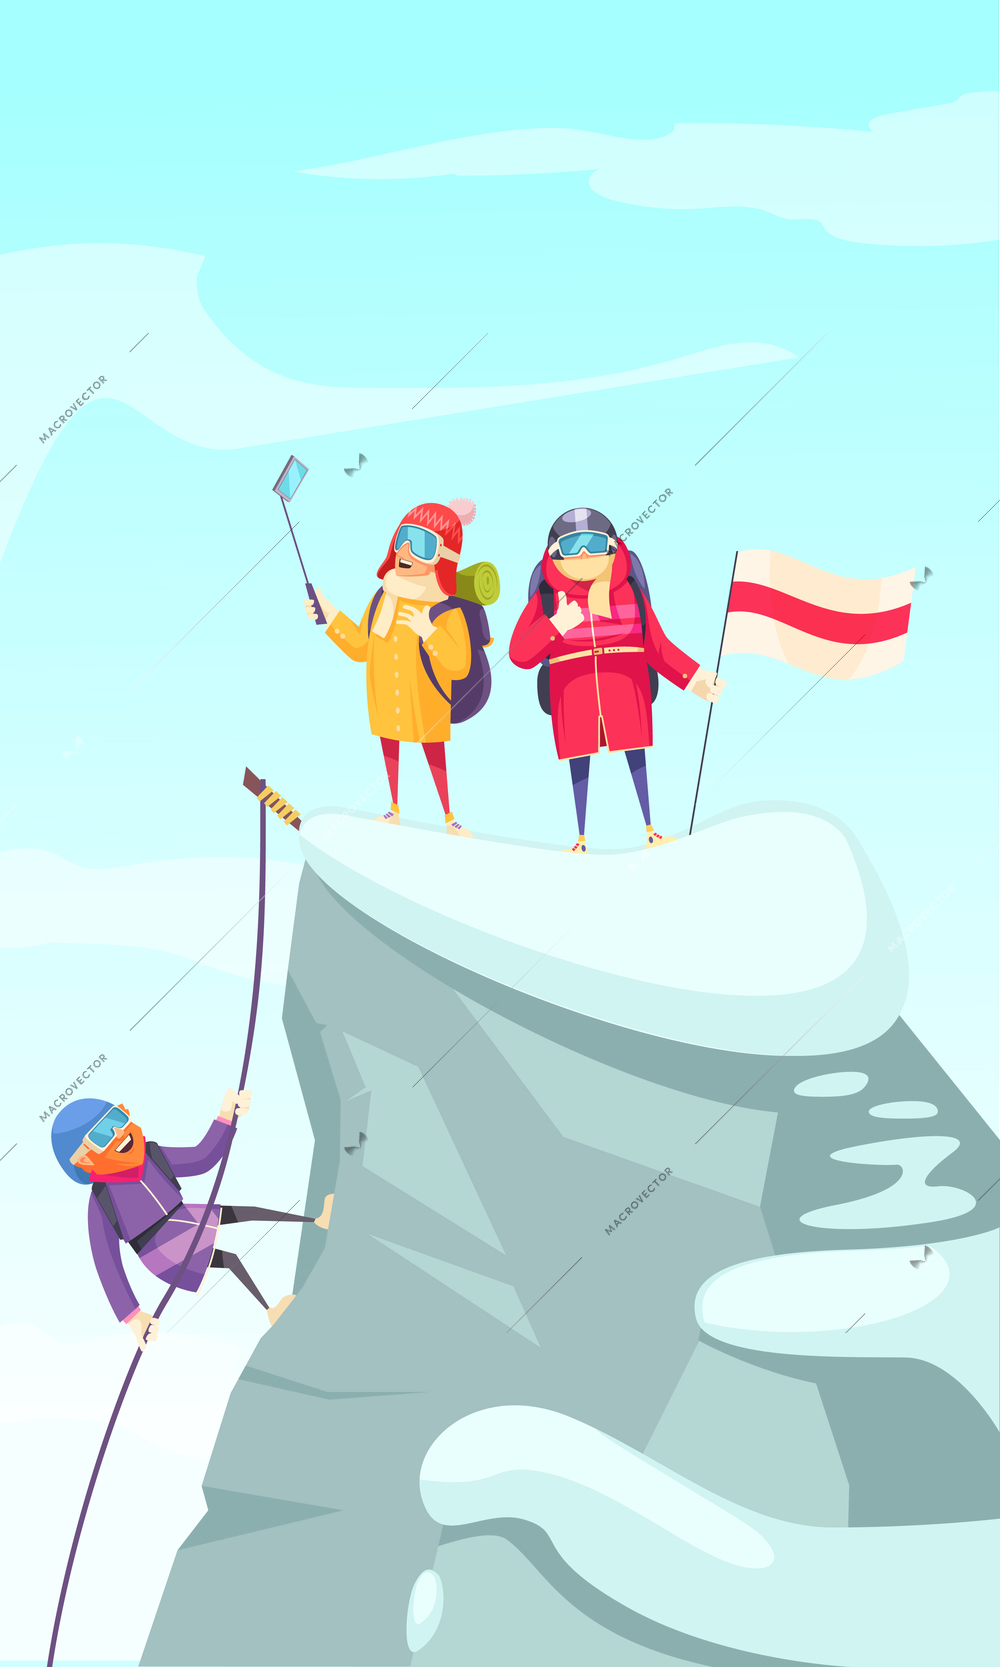 Mountaineering cartoon picture with mountain climbers ascending rock peak and making selfie on the top vector illustration